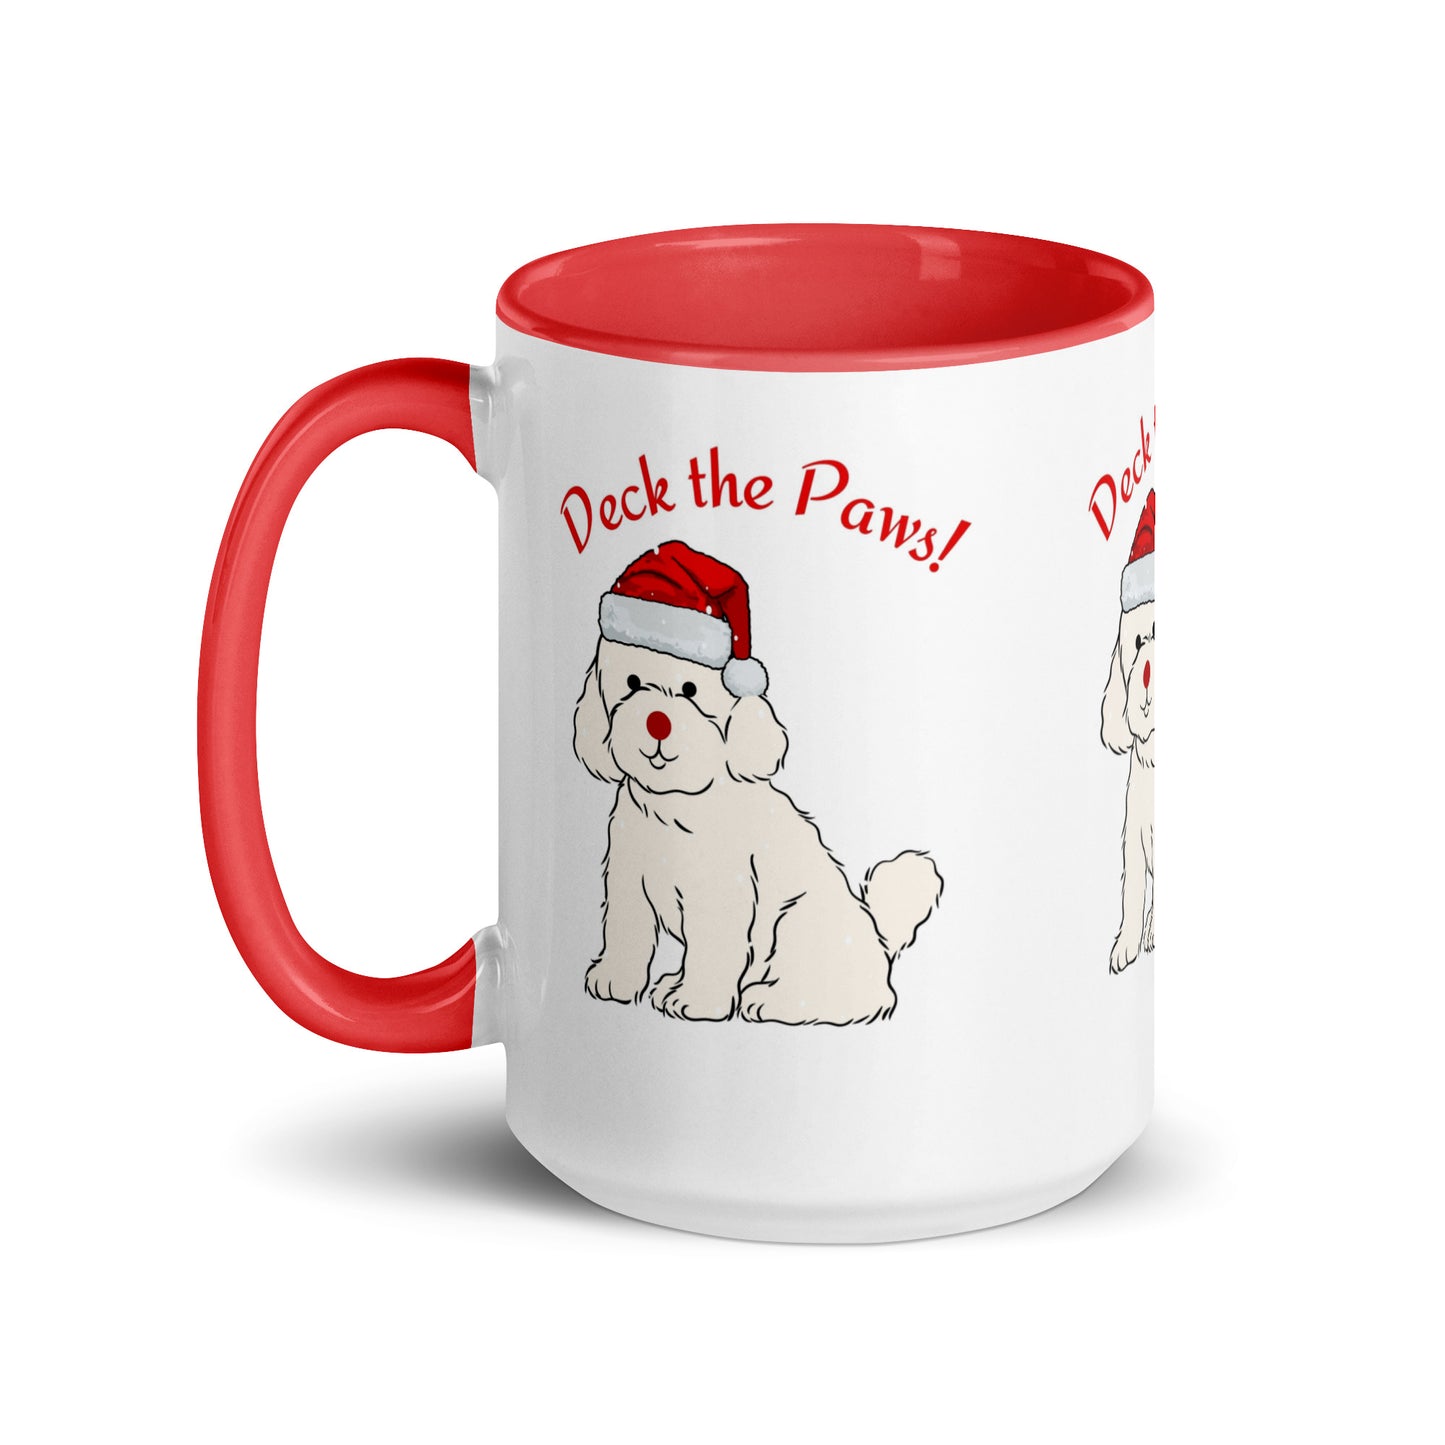 Charming Christmas Mug Design for Cozy Sips. Embrace the charm of a Christmas mug with a delightful design, perfect for creating cozy moments with a cup of hot cocoa or hot chocolate. Get inspired to celebrate the season sip by sip.